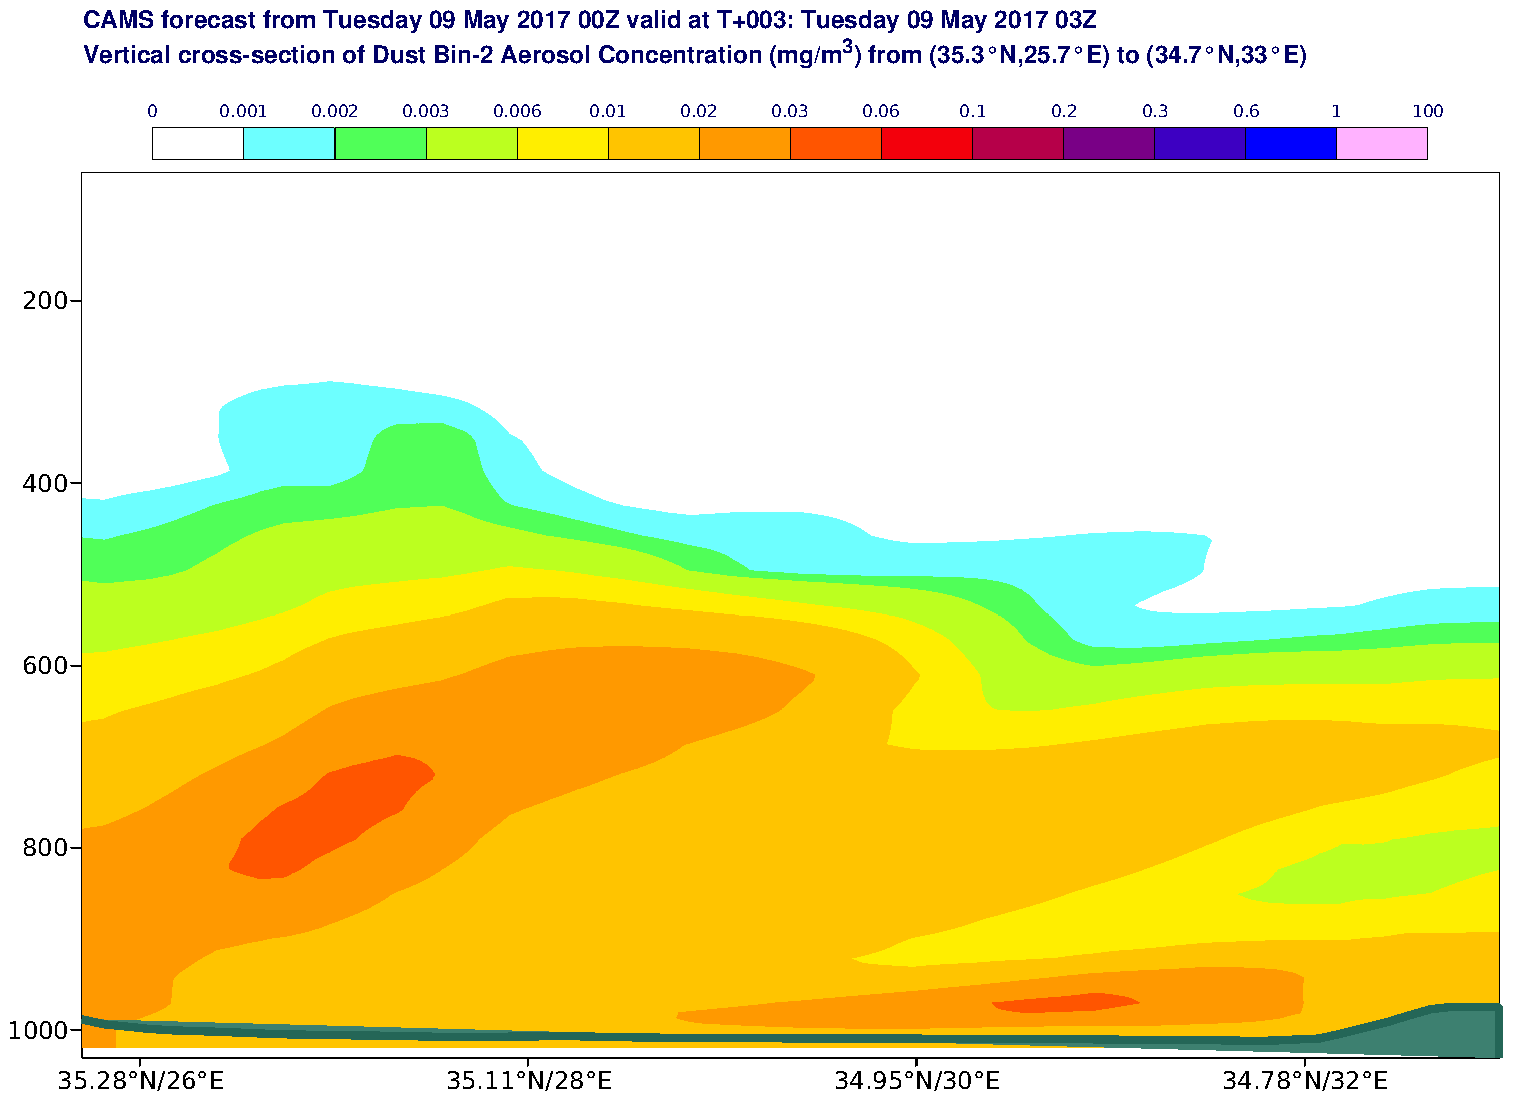 Vertical cross-section of Dust Bin-2 Aerosol Concentration (mg/m3) valid at T3 - 2017-05-09 03:00